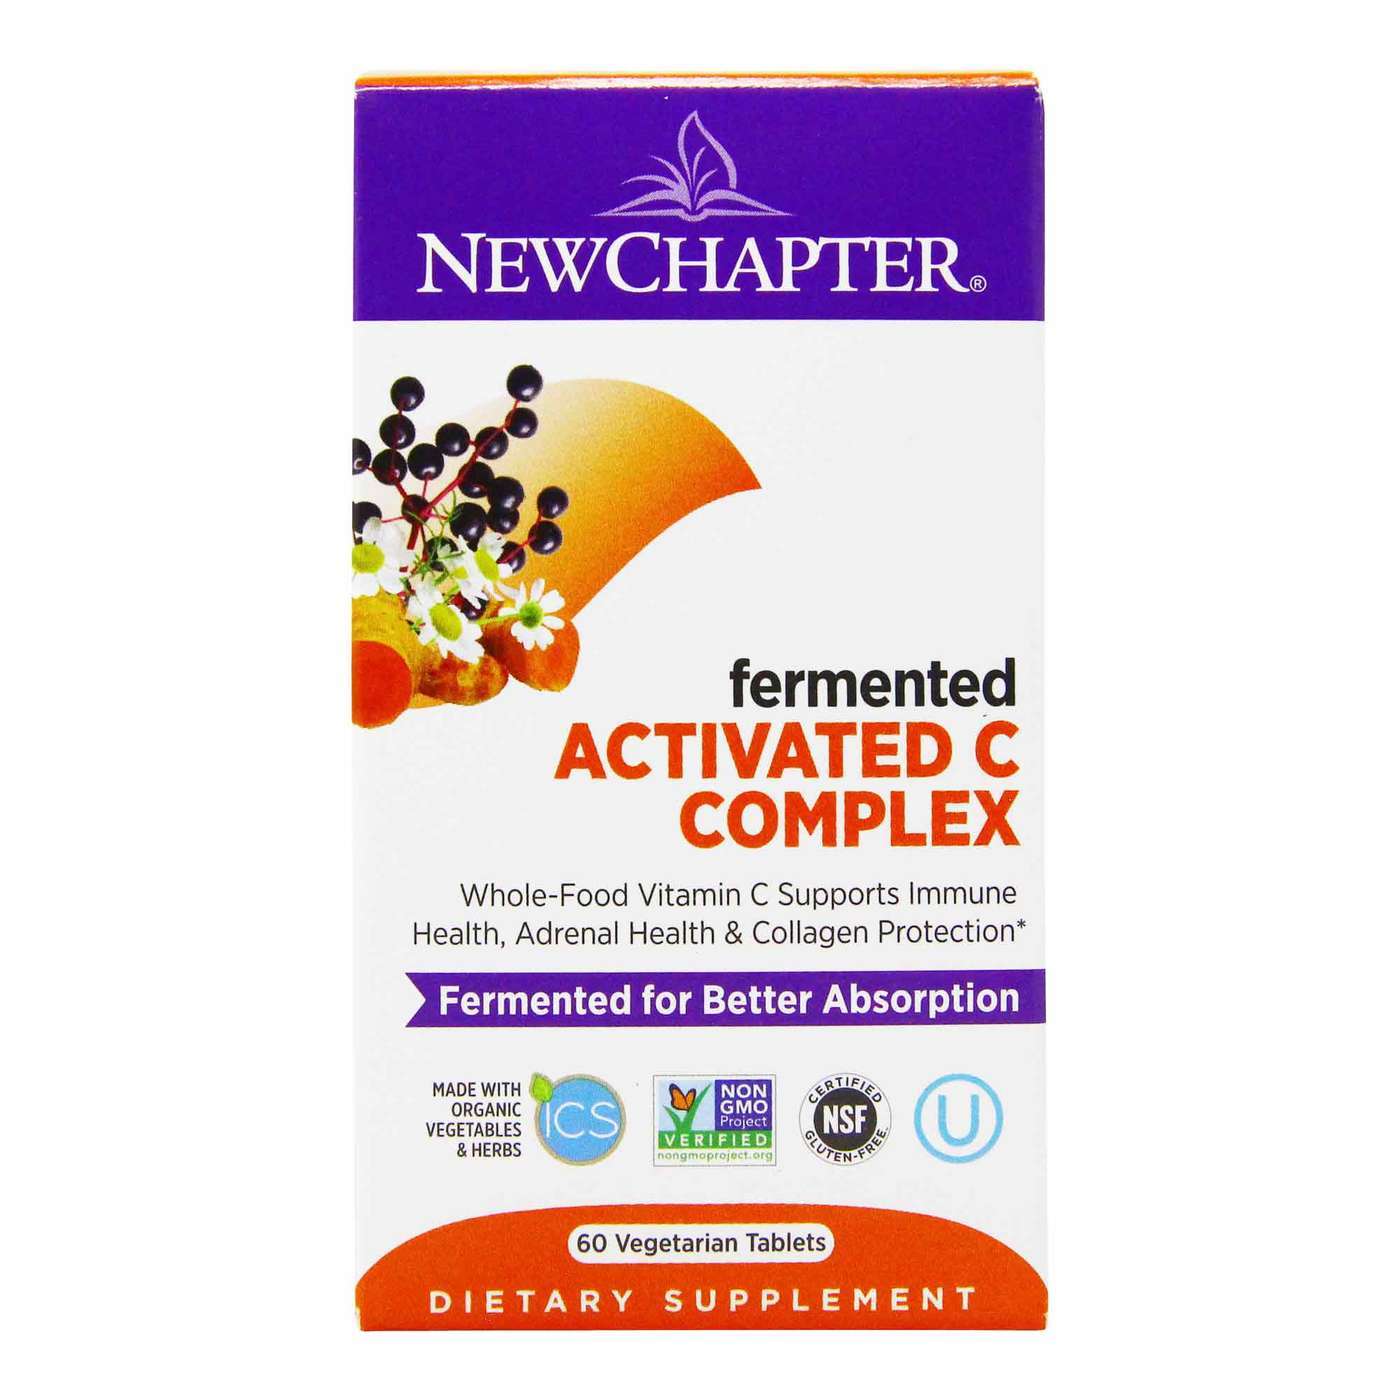 New Chapter Fermented Activated C Complex 60 Vegetarian Tablets Evitamins Com,Sierra Designs High Route Fl 1